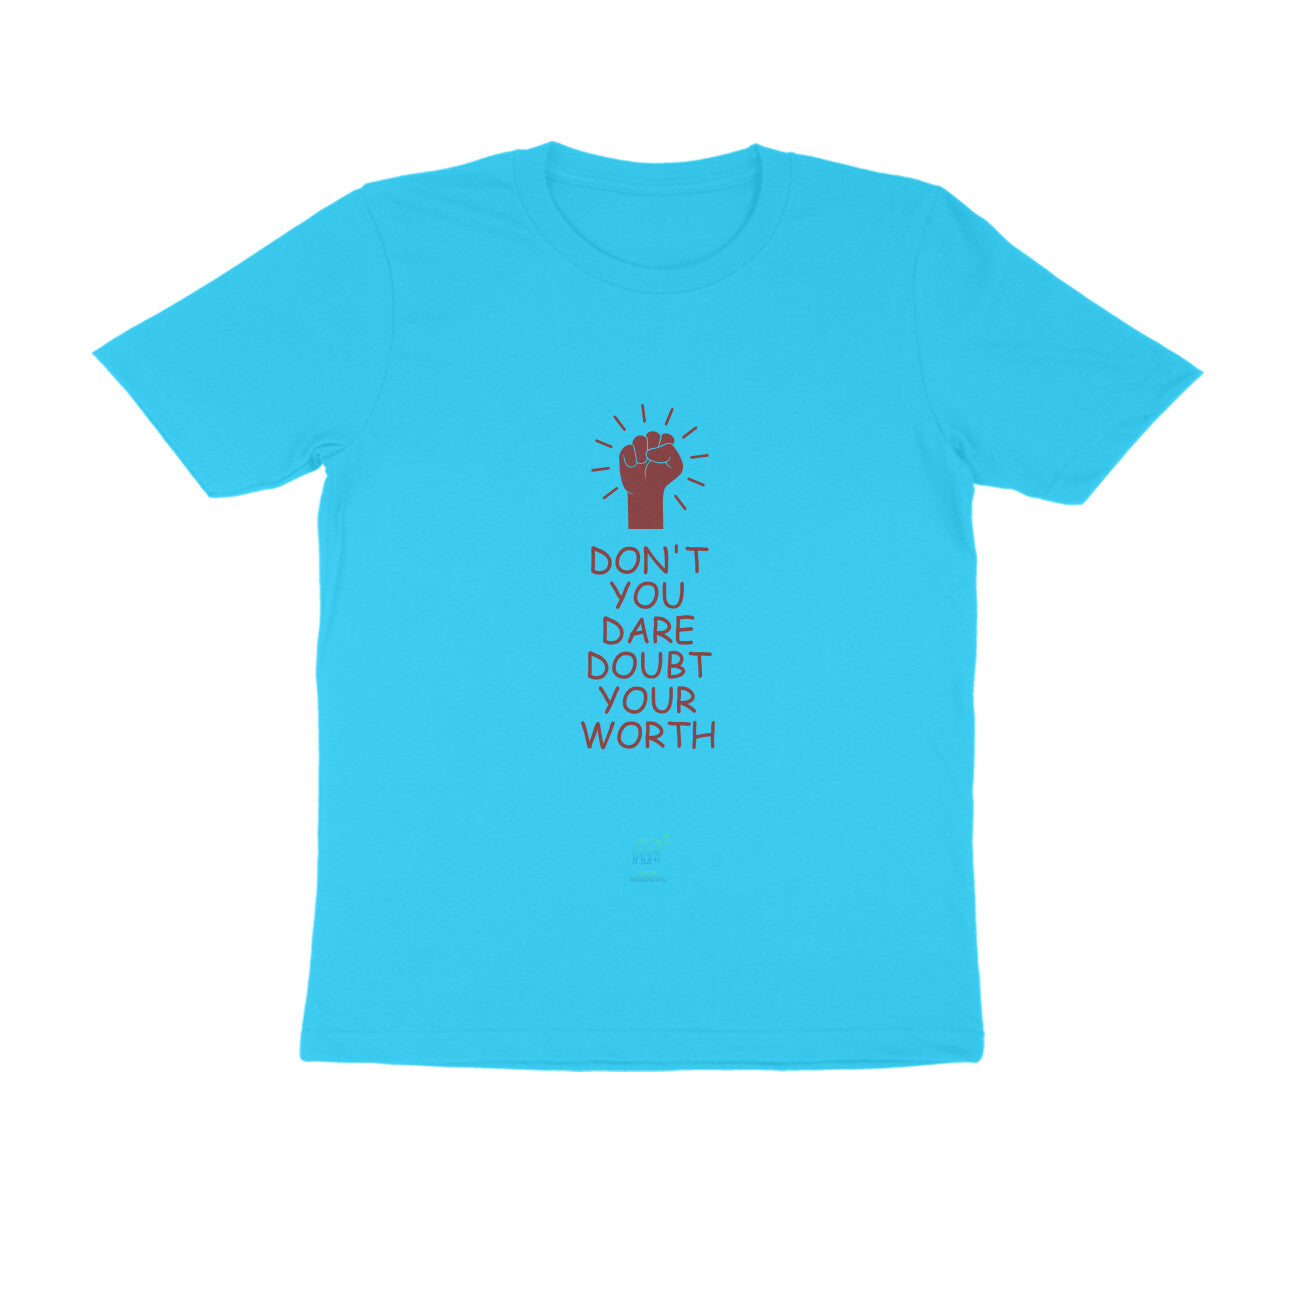 Gospel ( Don't you dare doubt your worth )-Unisex Tees